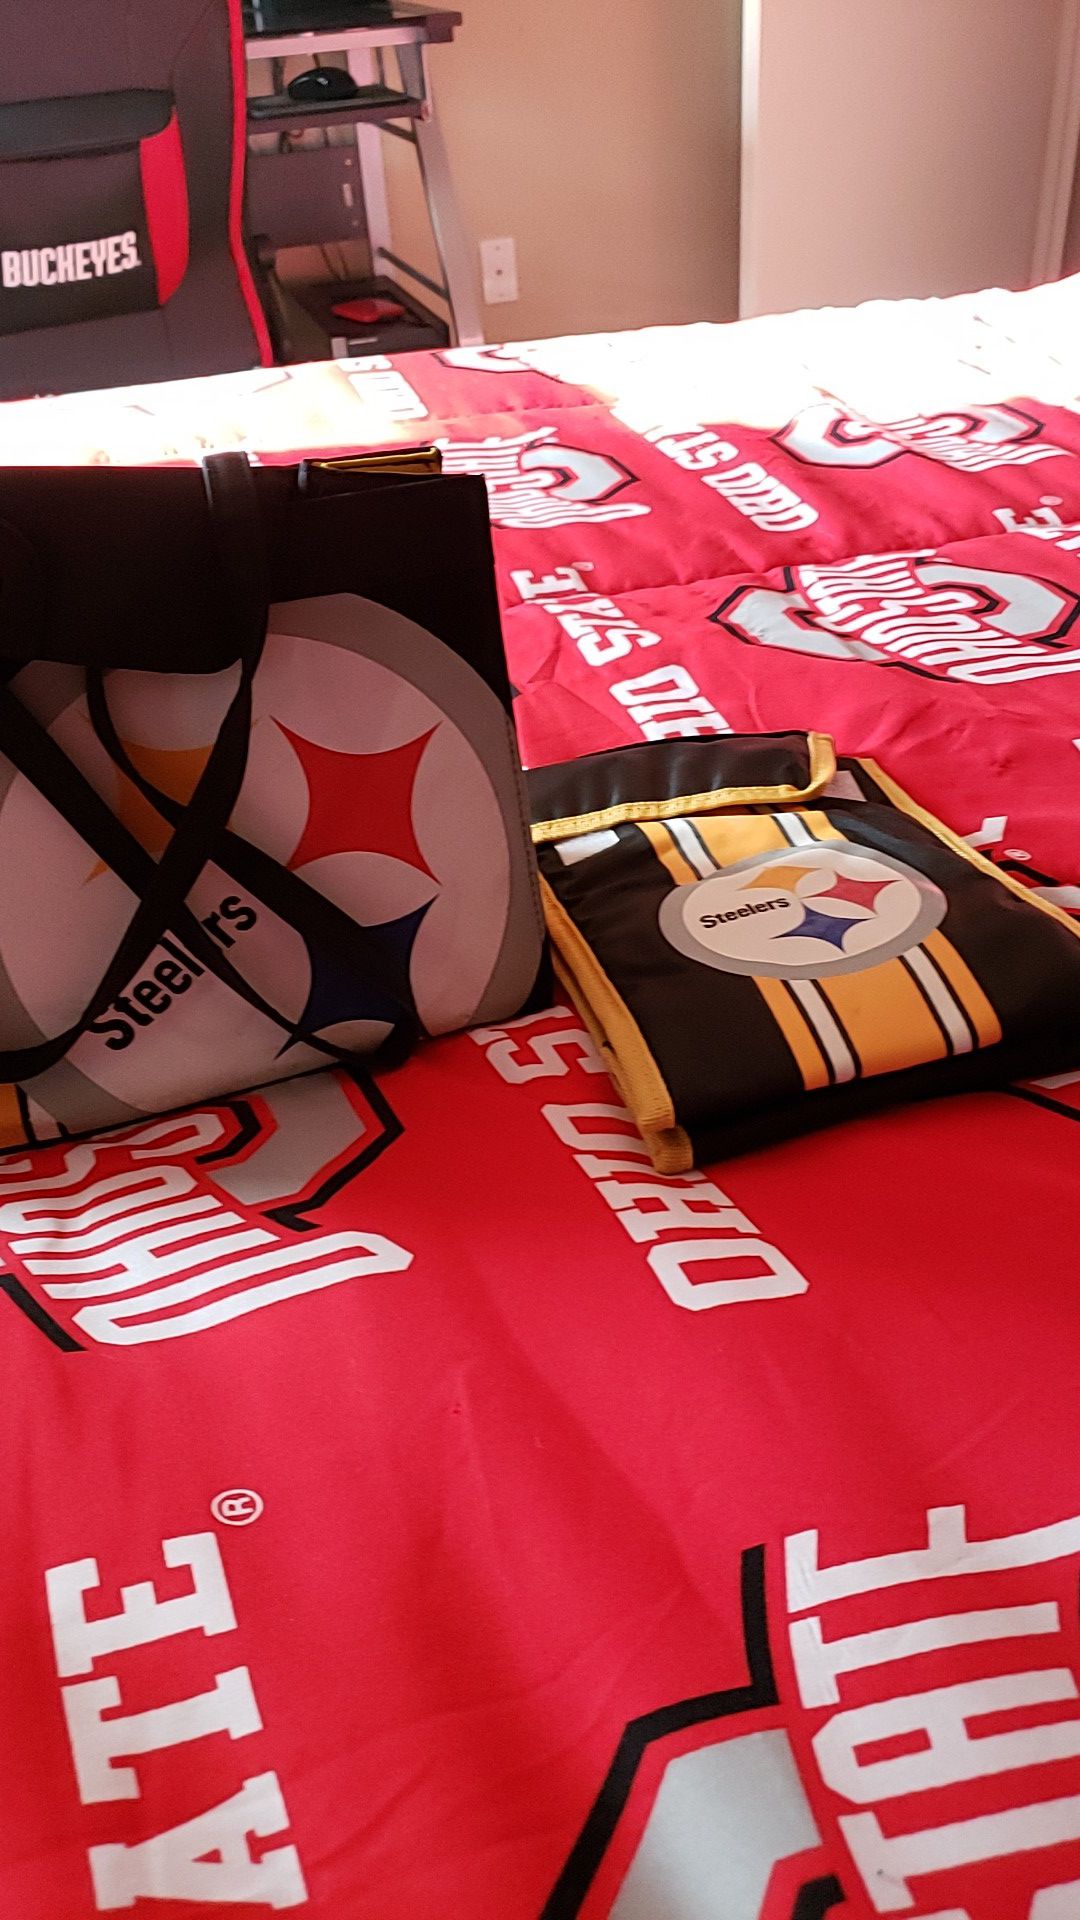 Steelers purse and small cooler